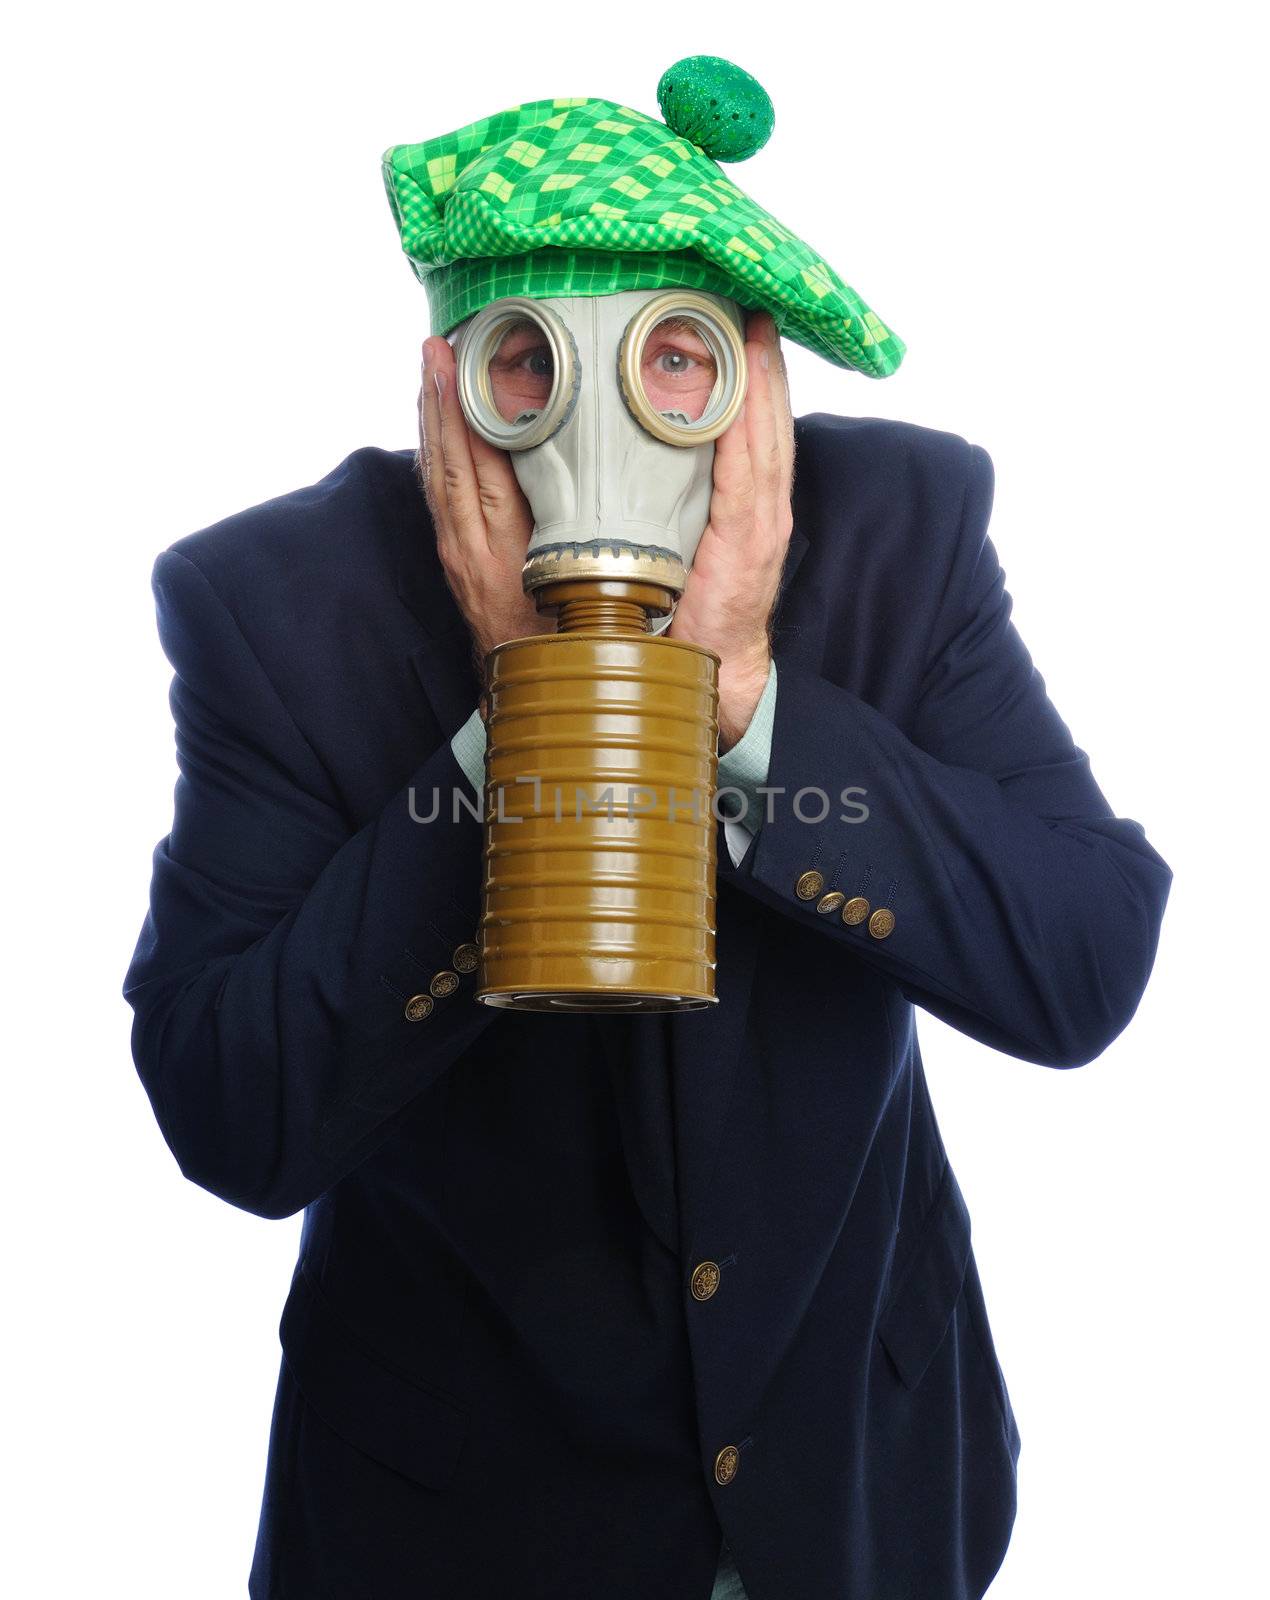 Man wearing a suit and gas mask on a white background